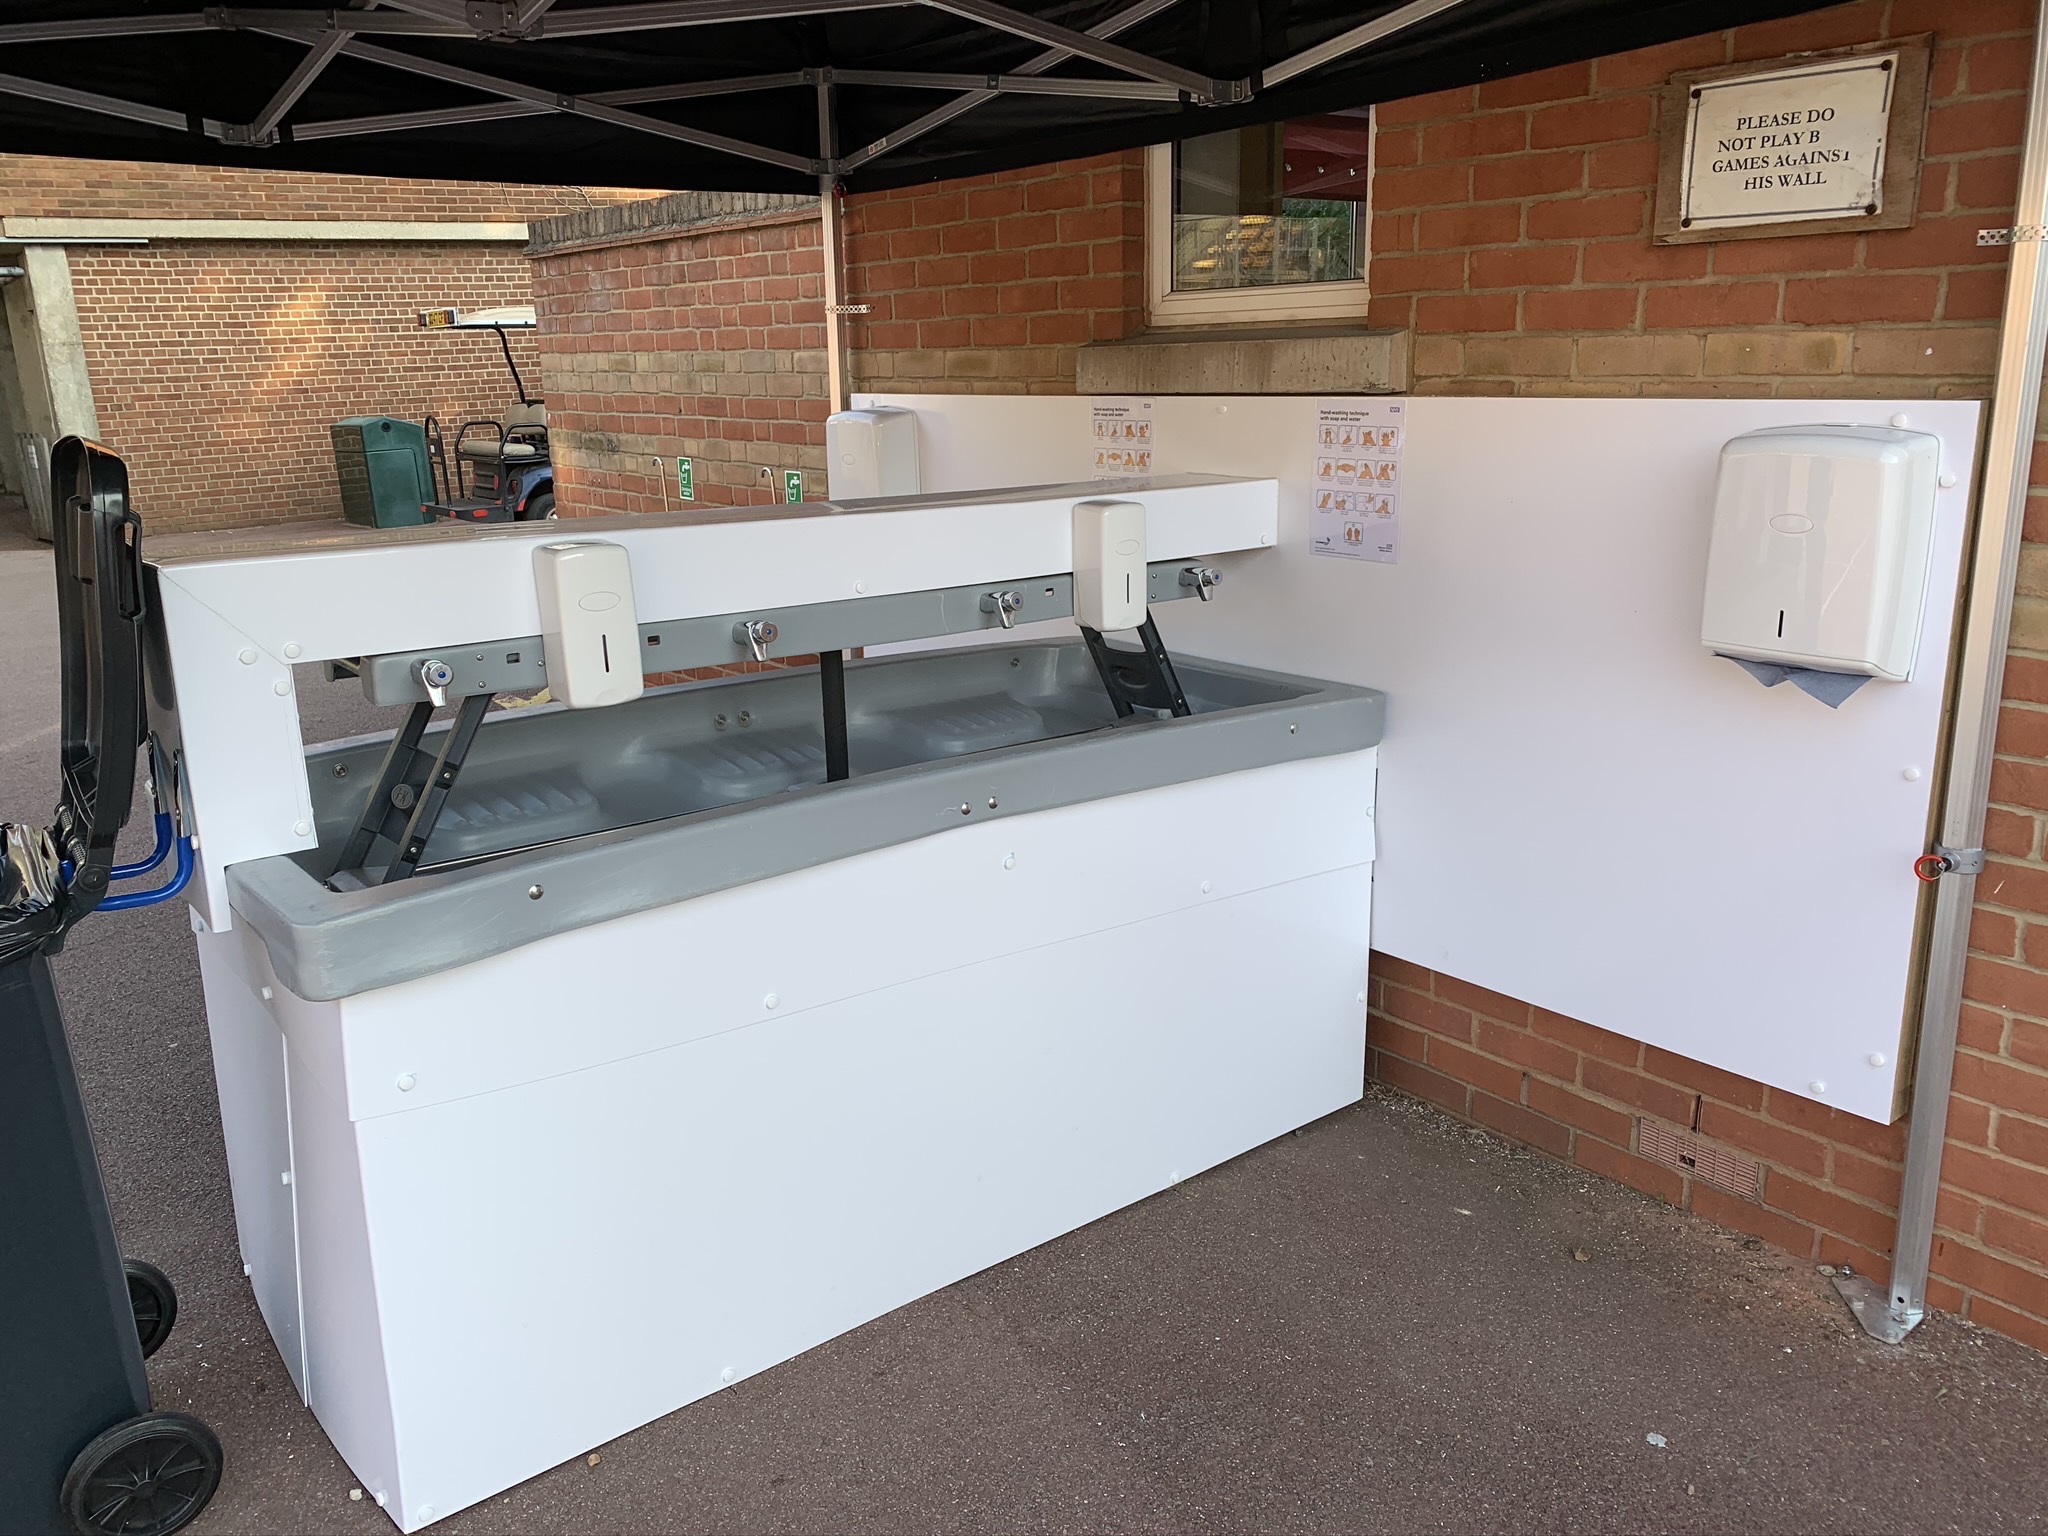 Dulwich College Covid Wash Stations in Dulwich College, London